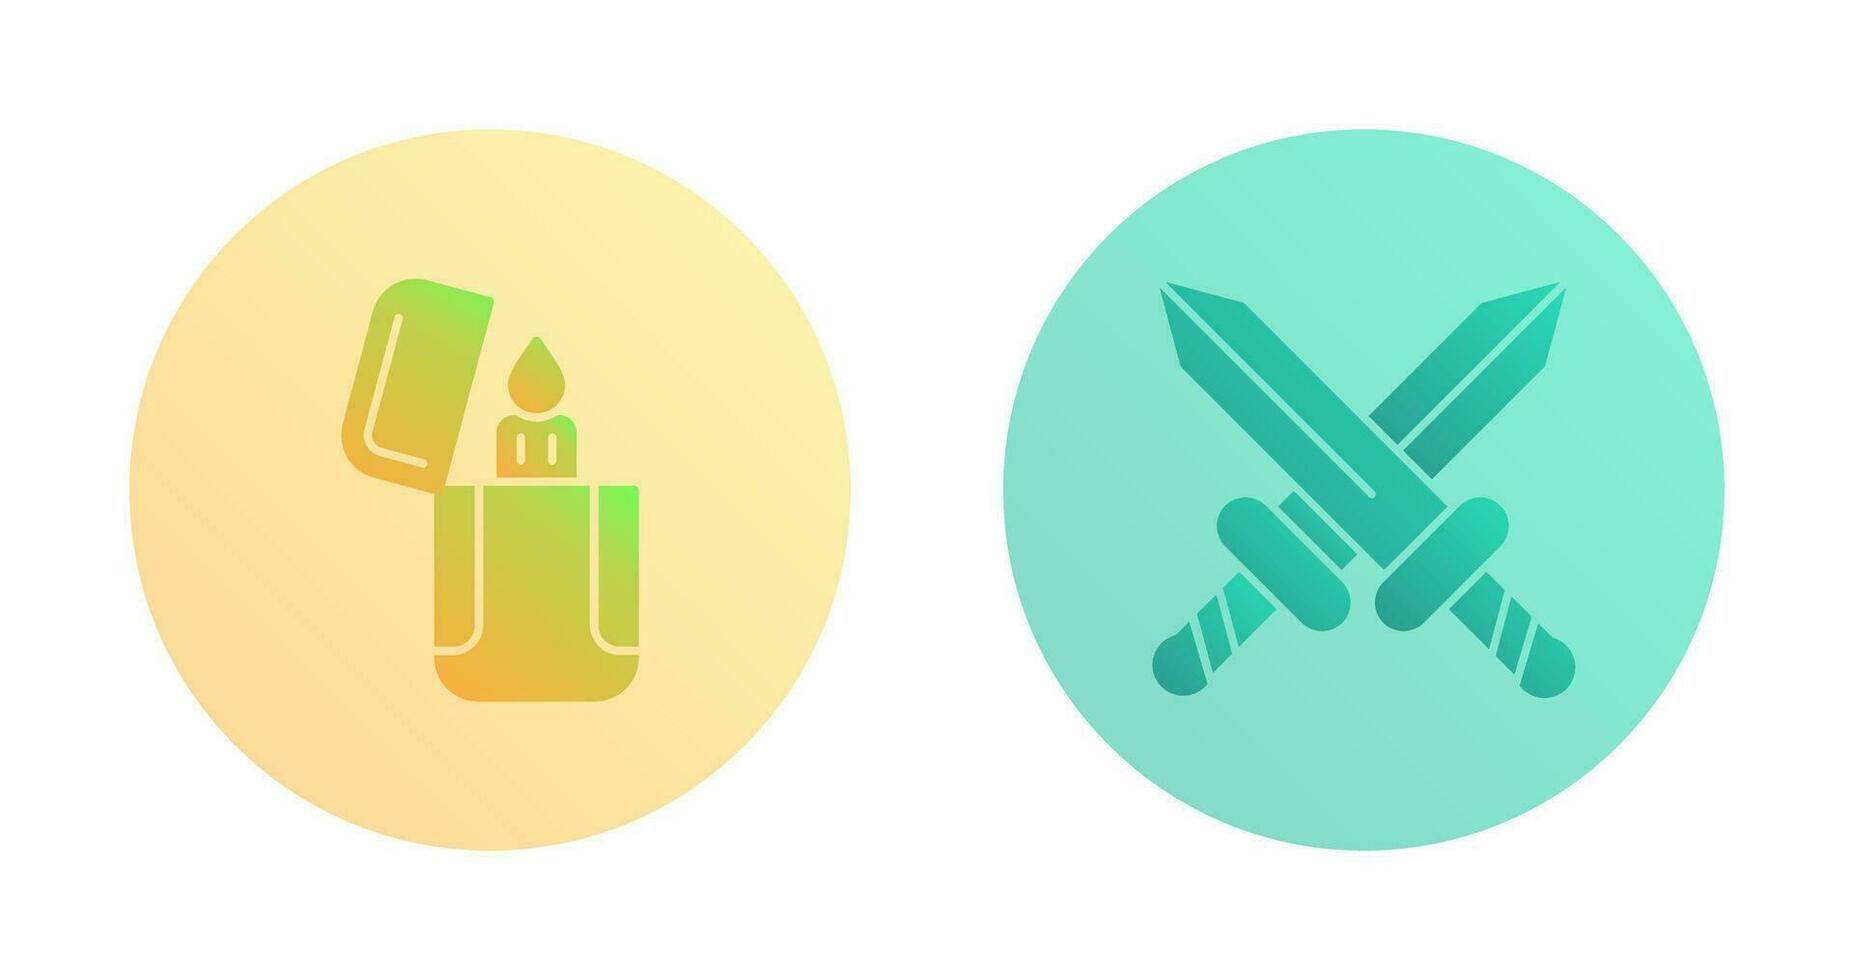 Lighter and Sword Icon vector